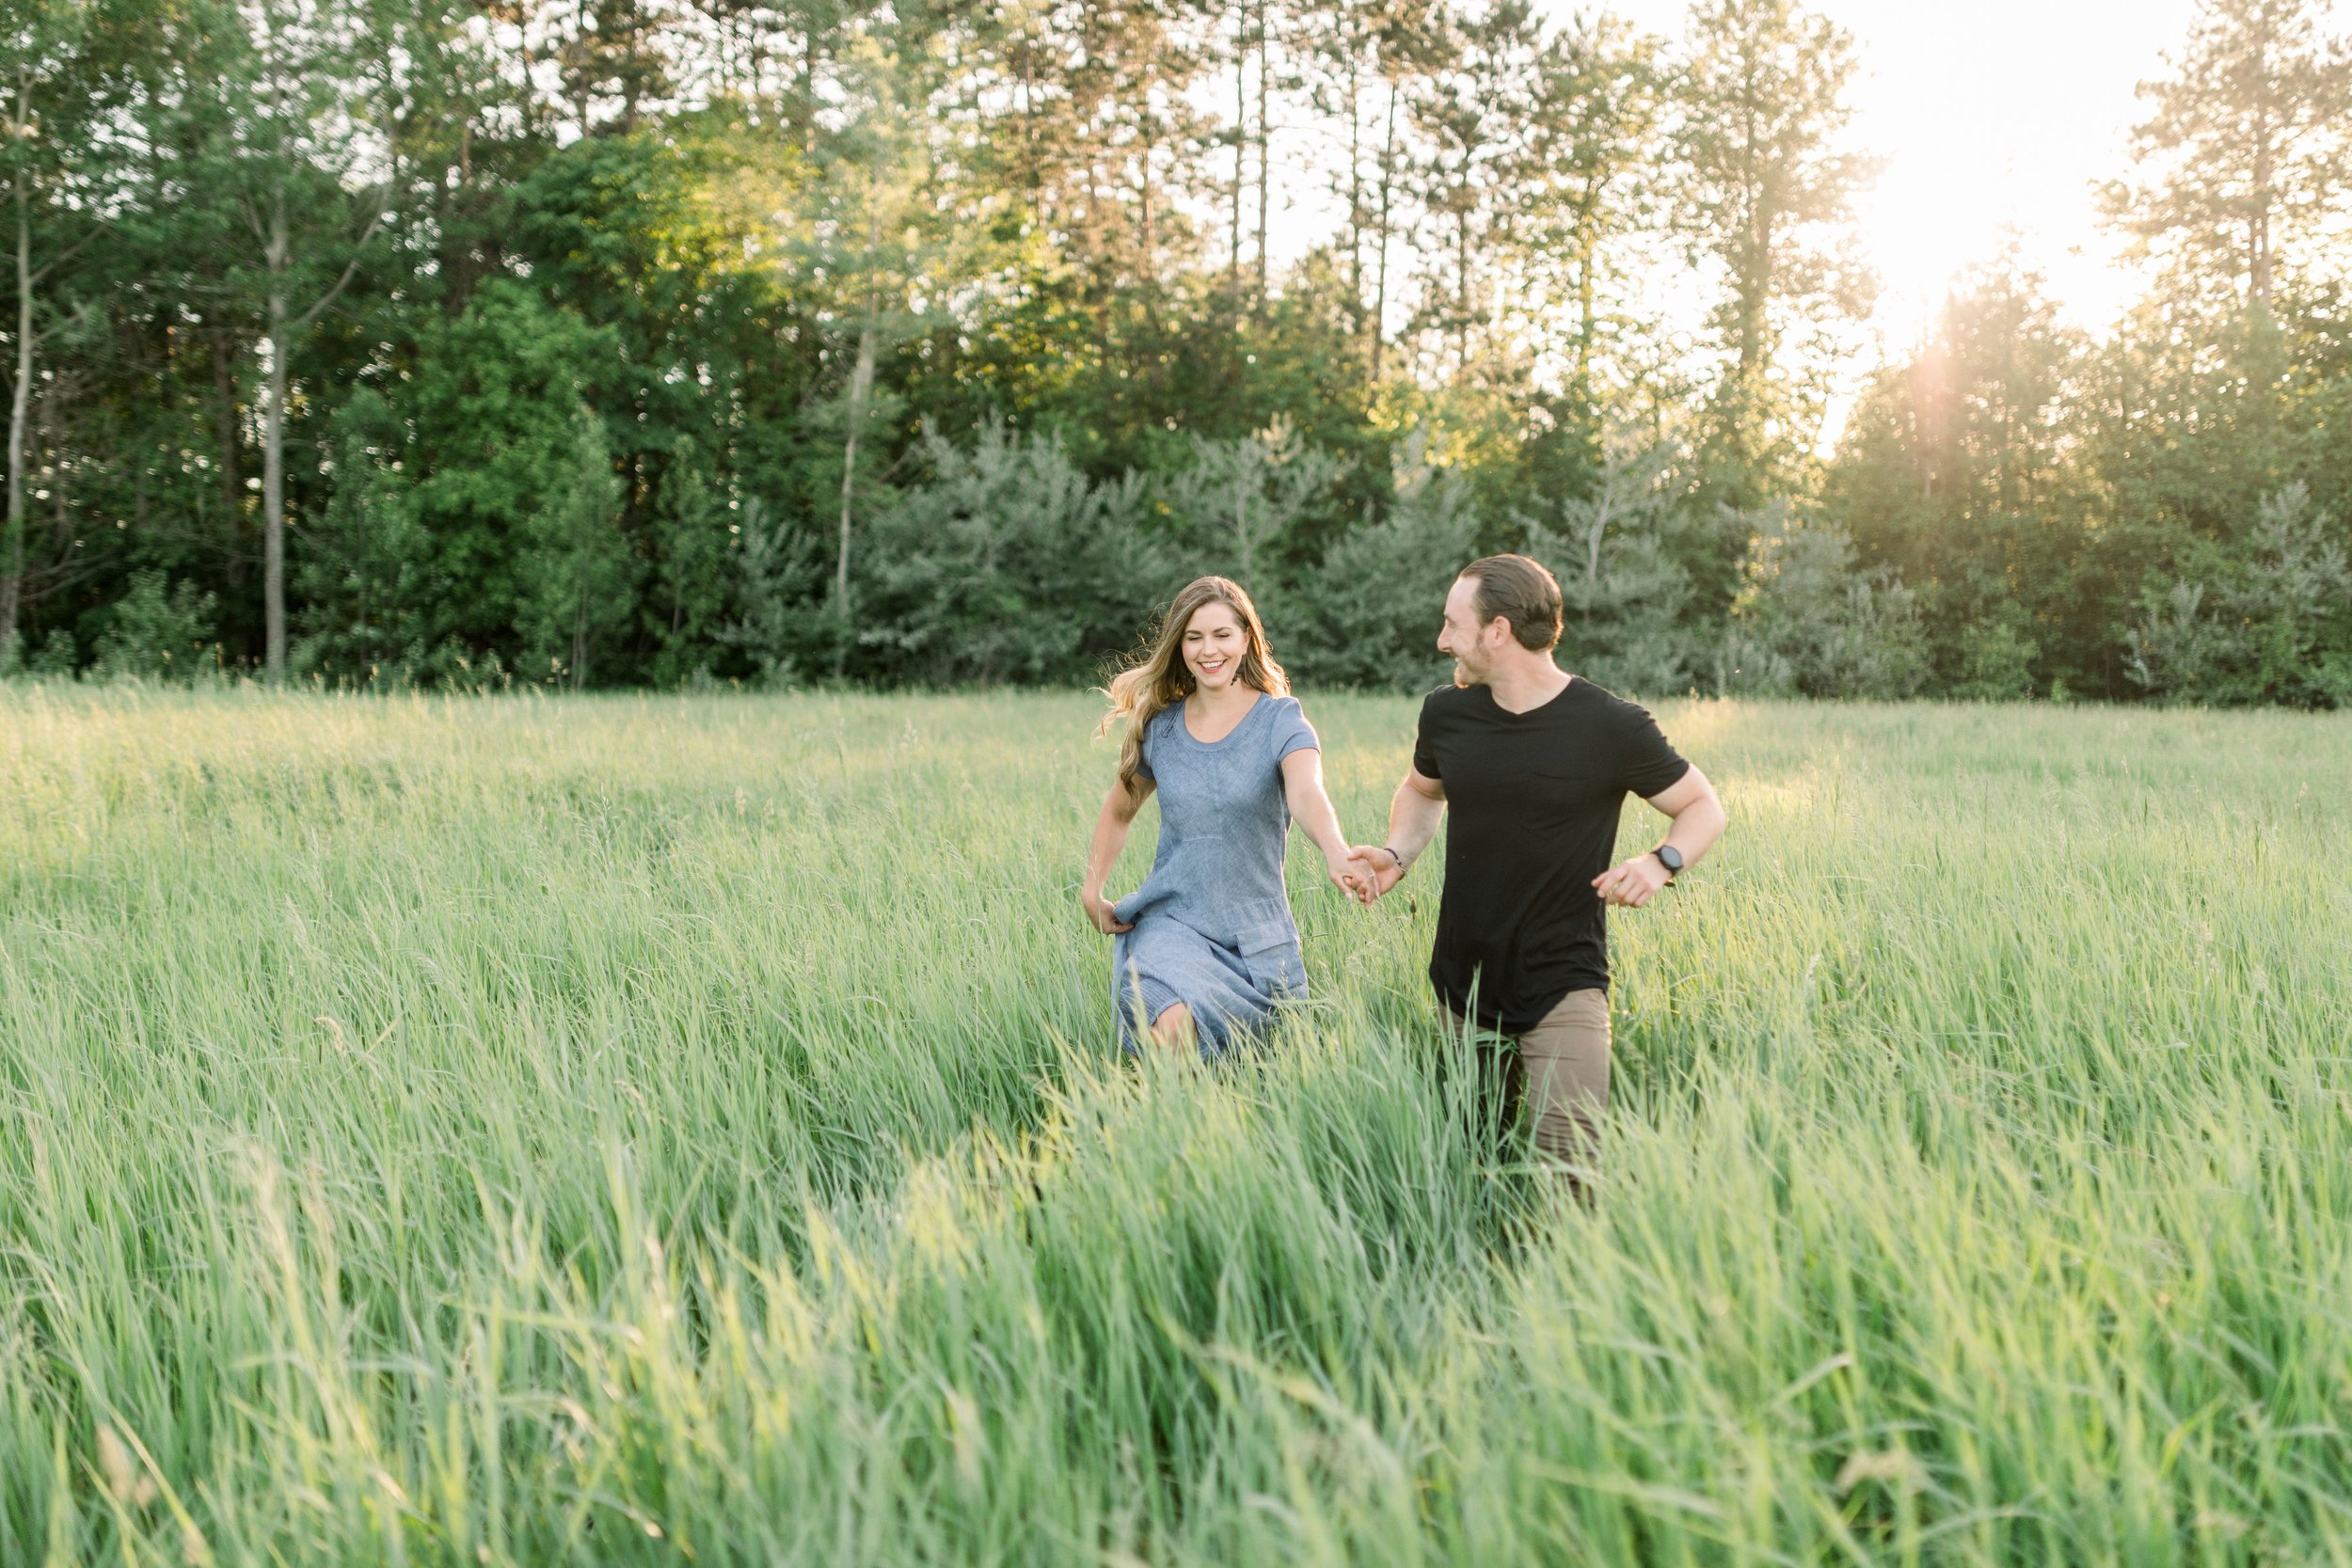  Walking in a field of grass Chelsea Mason Photography captures a wedding announcement portrait. engagements in grass field clearing #chelseamasonphotography #chelseamasonengagements #Ottawaengagments #Almonteengagementphotographer #outdoorengagments